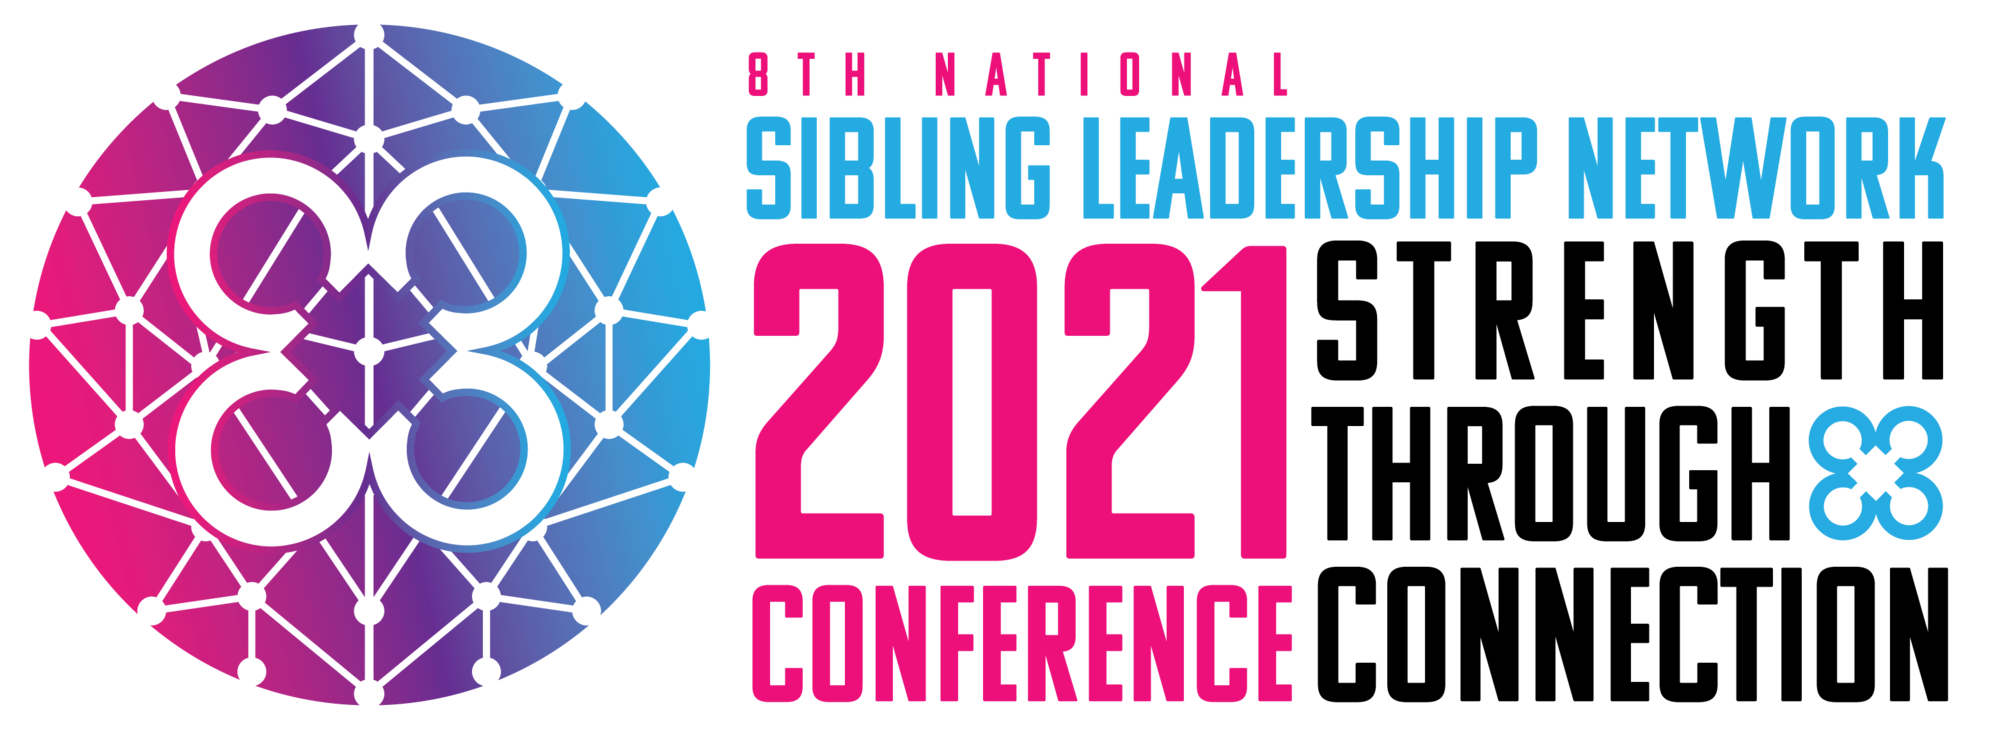 Purple, pink, an d globe. Text: 8TH ANNUAL 2021 NATIONAL SIBLING LEADERSHIP NETWORK CONFERENCE. STRENGTH THROUGH CONNECTION